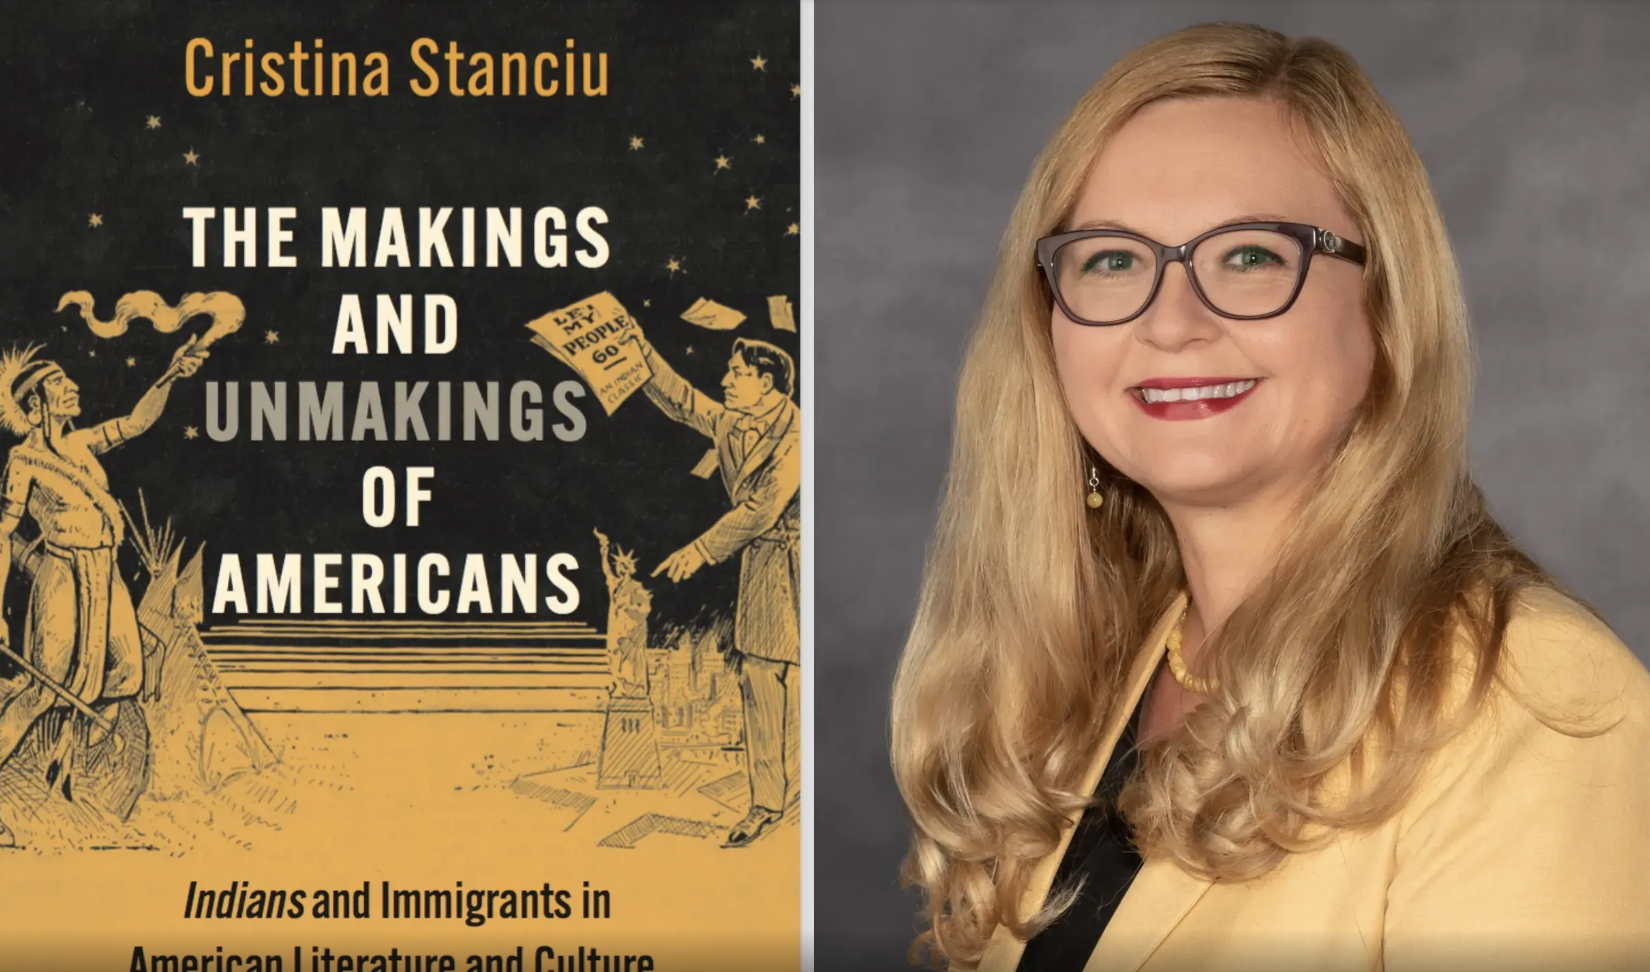 VCU professor Cristina Stanciu on her new book, ‘The Makings and Unmakings of Americans’